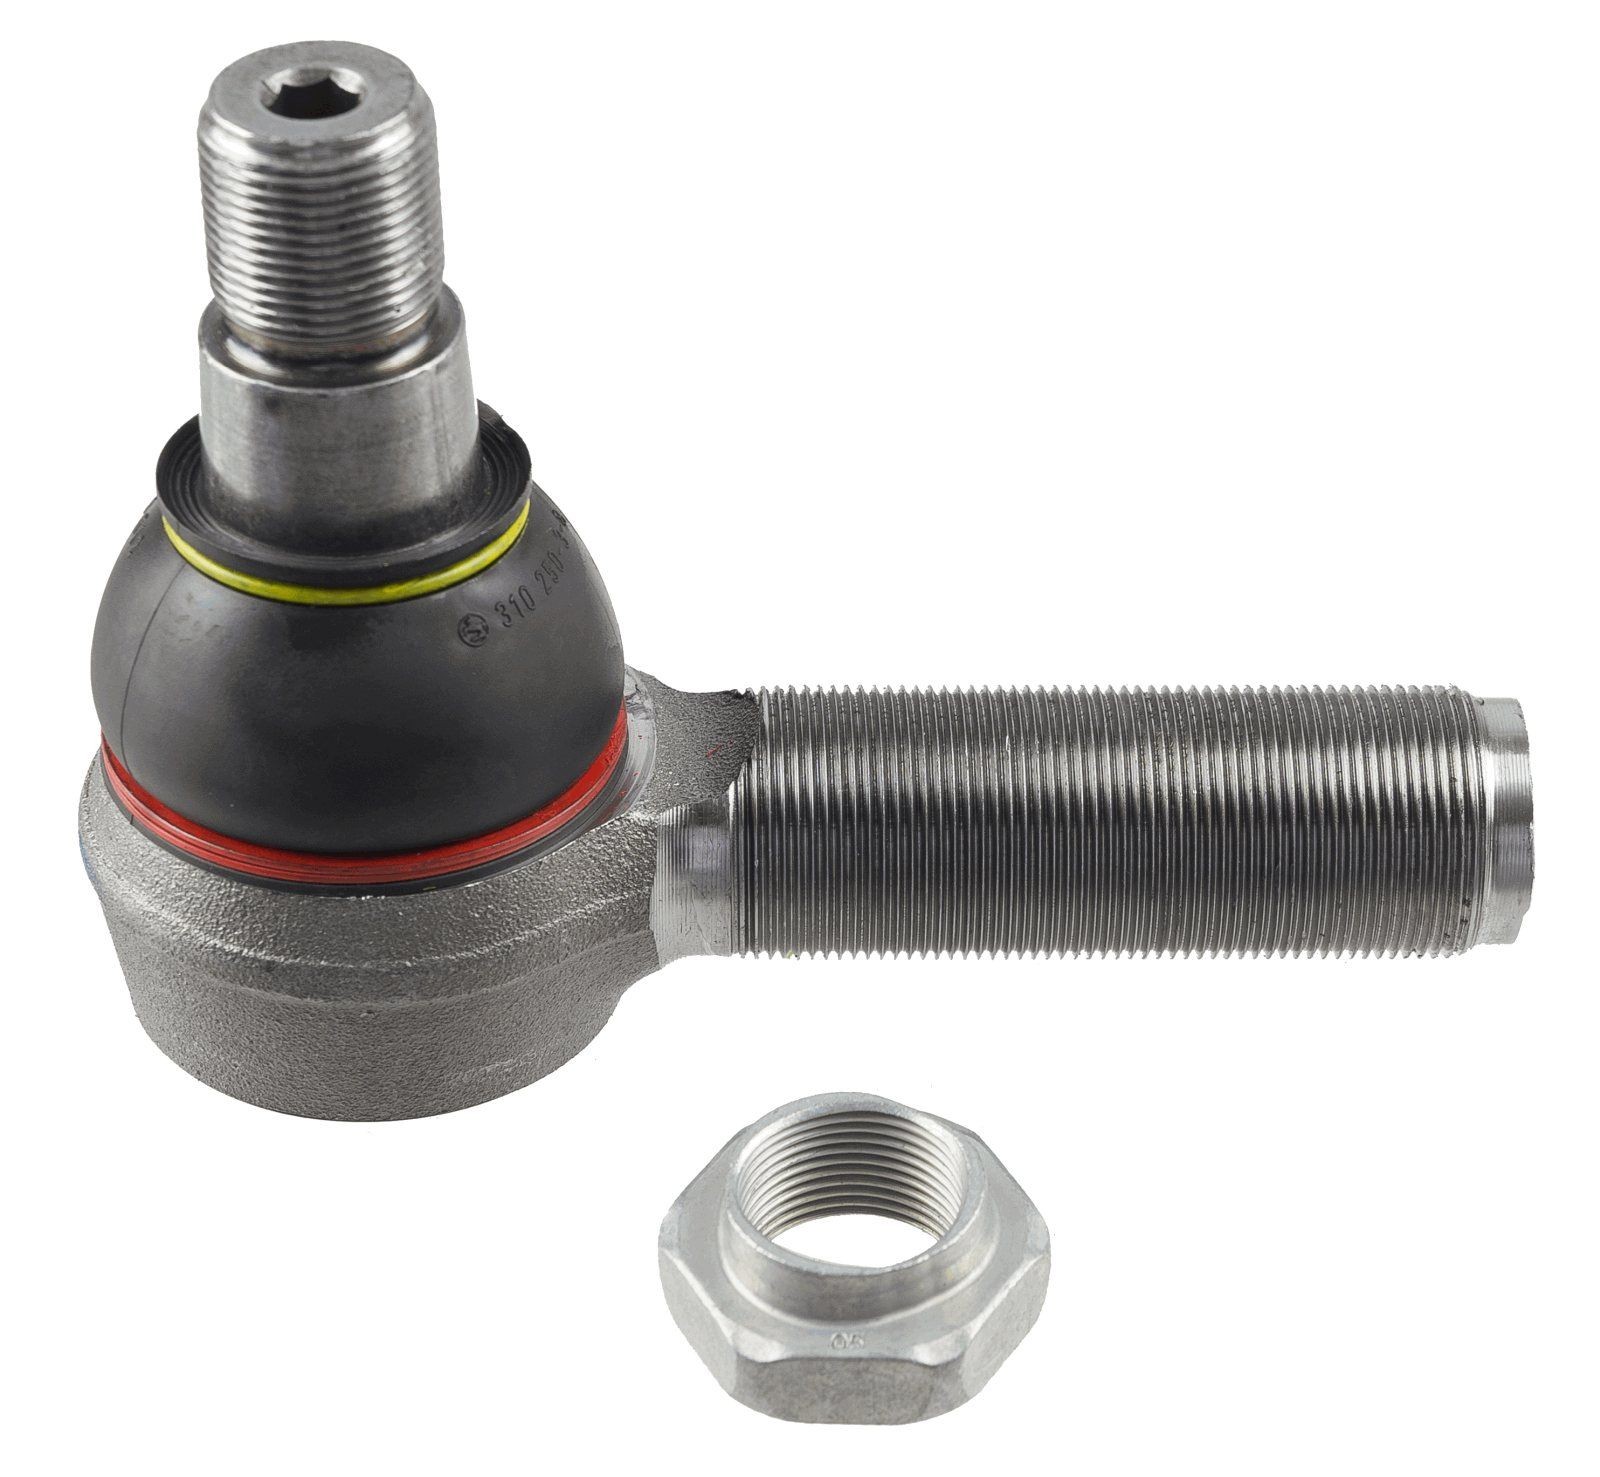 C:30/TH:M30x1,5R/L:120 LEMFÖRDER Cone Size 30 mm, M30x1,5 mm, with accessories Cone Size: 30mm, Thread Type: with right-hand thread Tie rod end 11505 03 buy